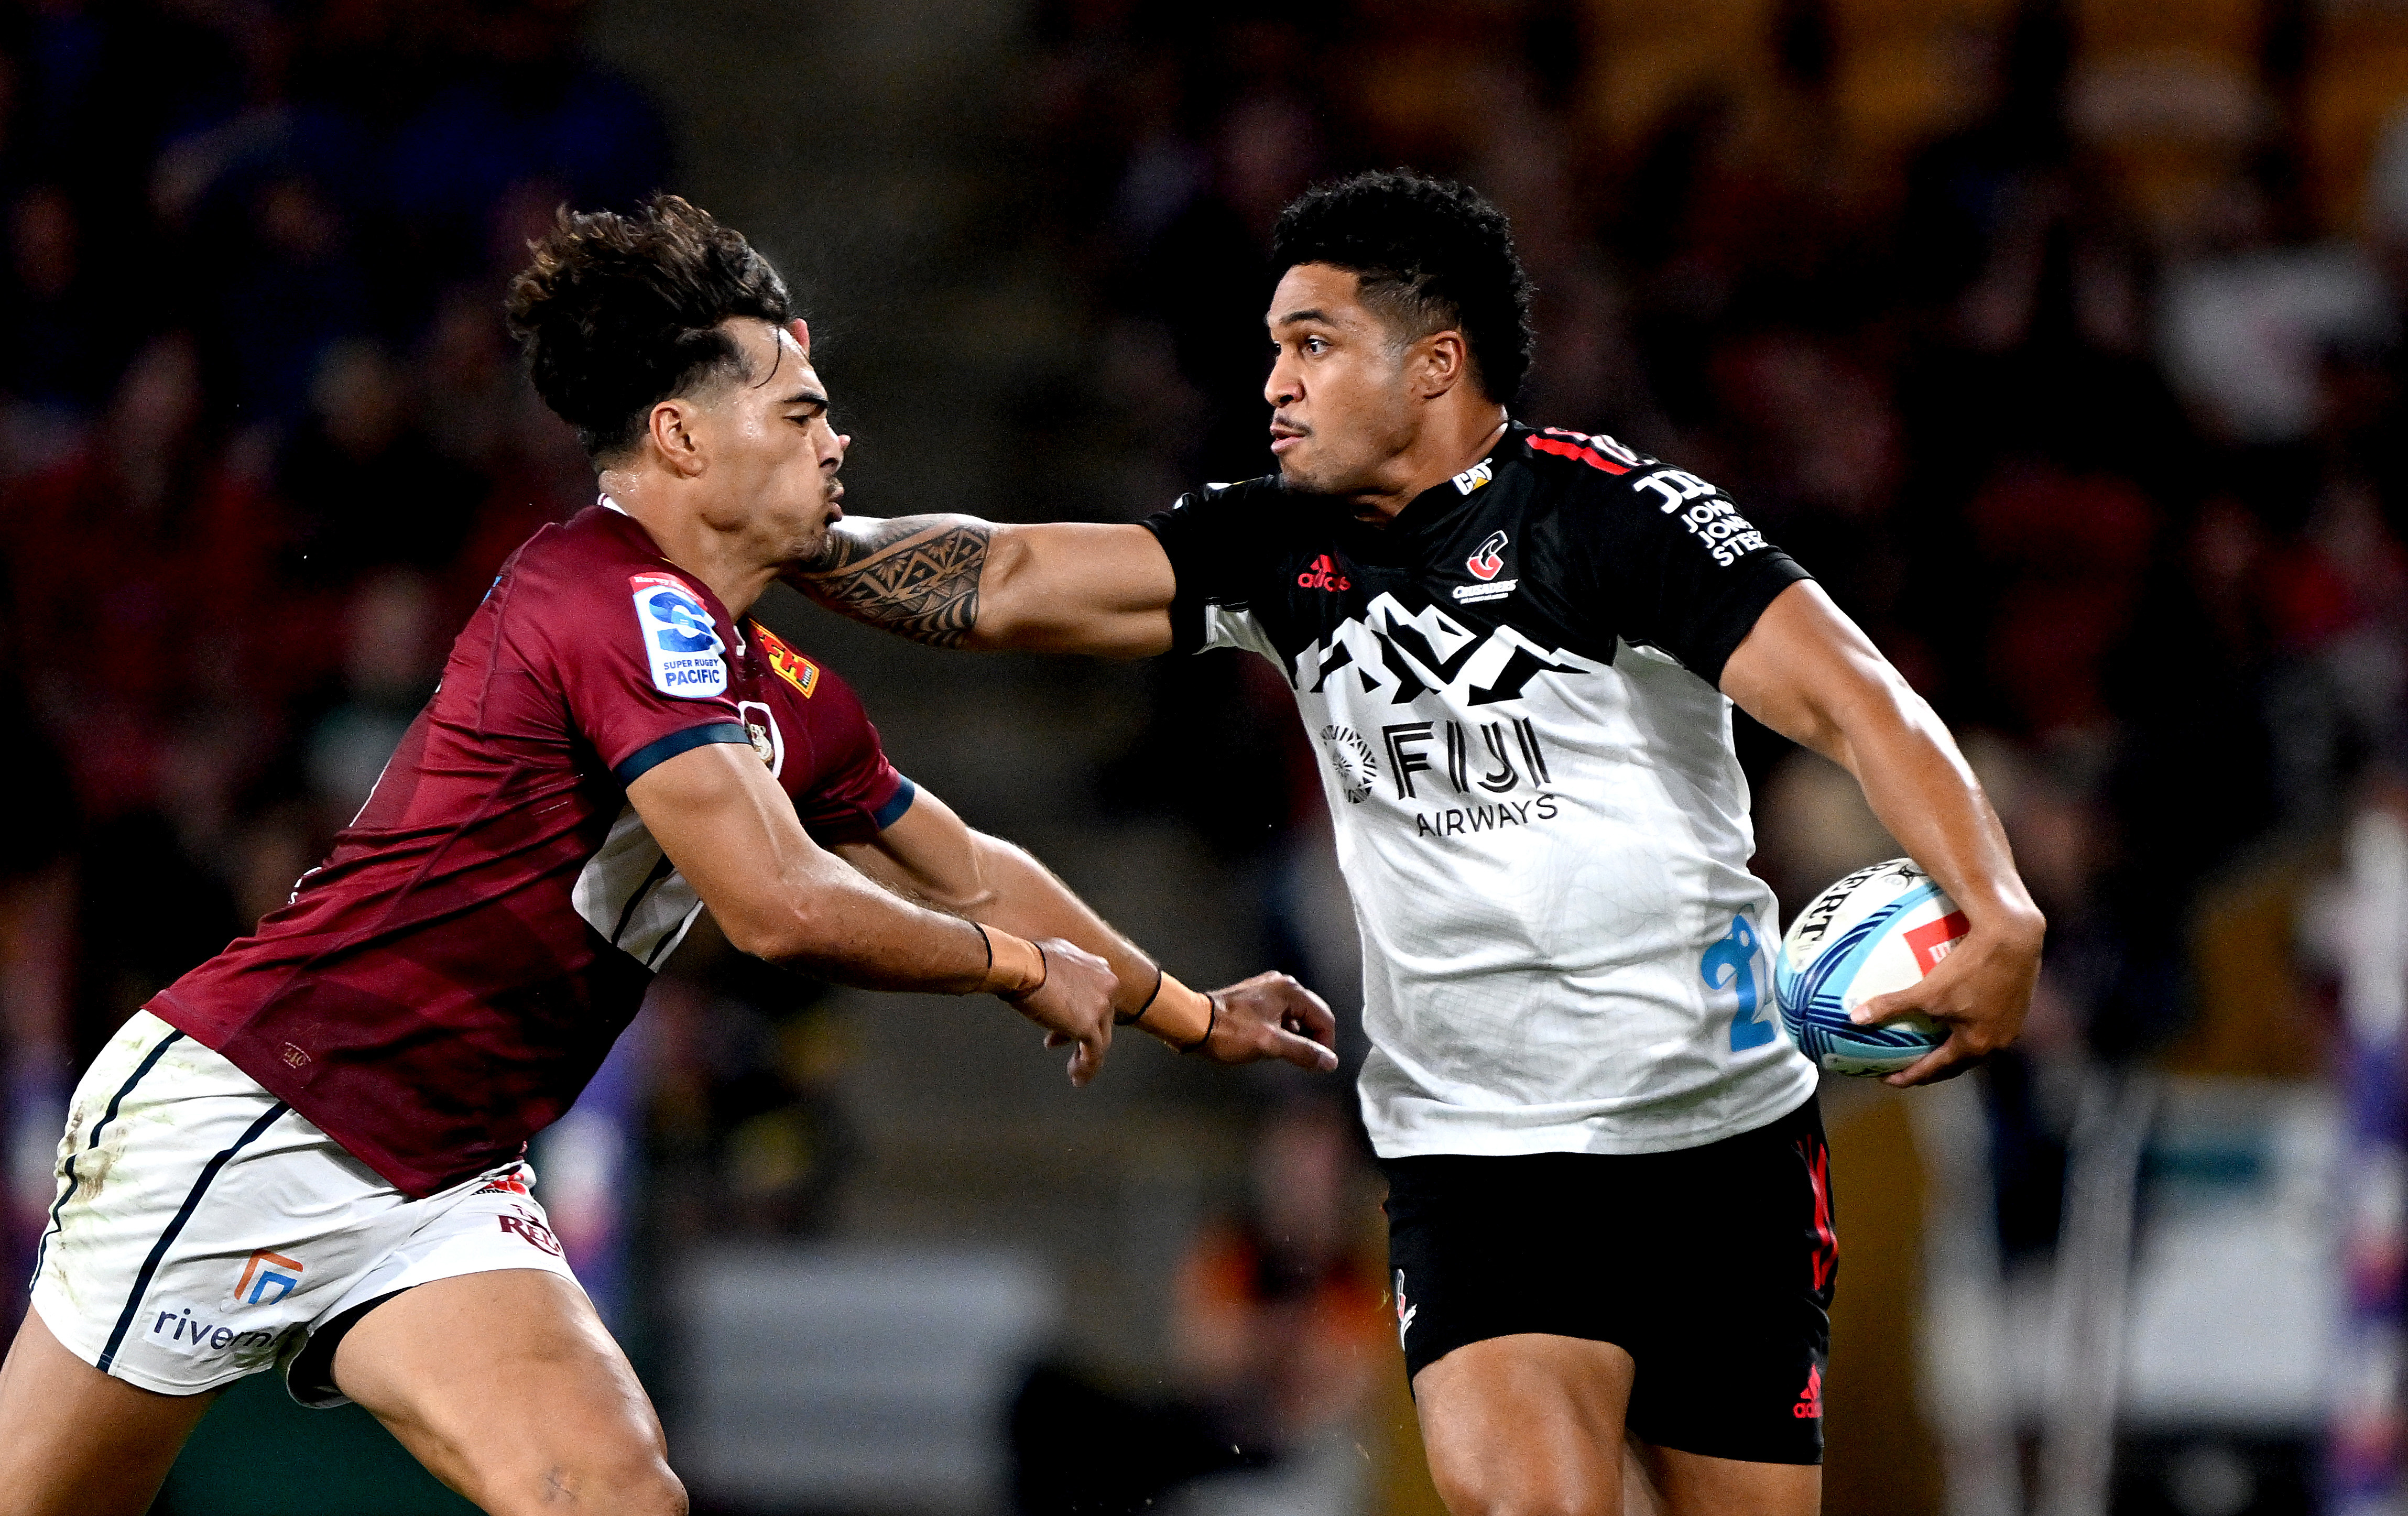 Leicester Fainga'anuku of the Crusaders takes on the defence of Jordan Petaia of the Reds.